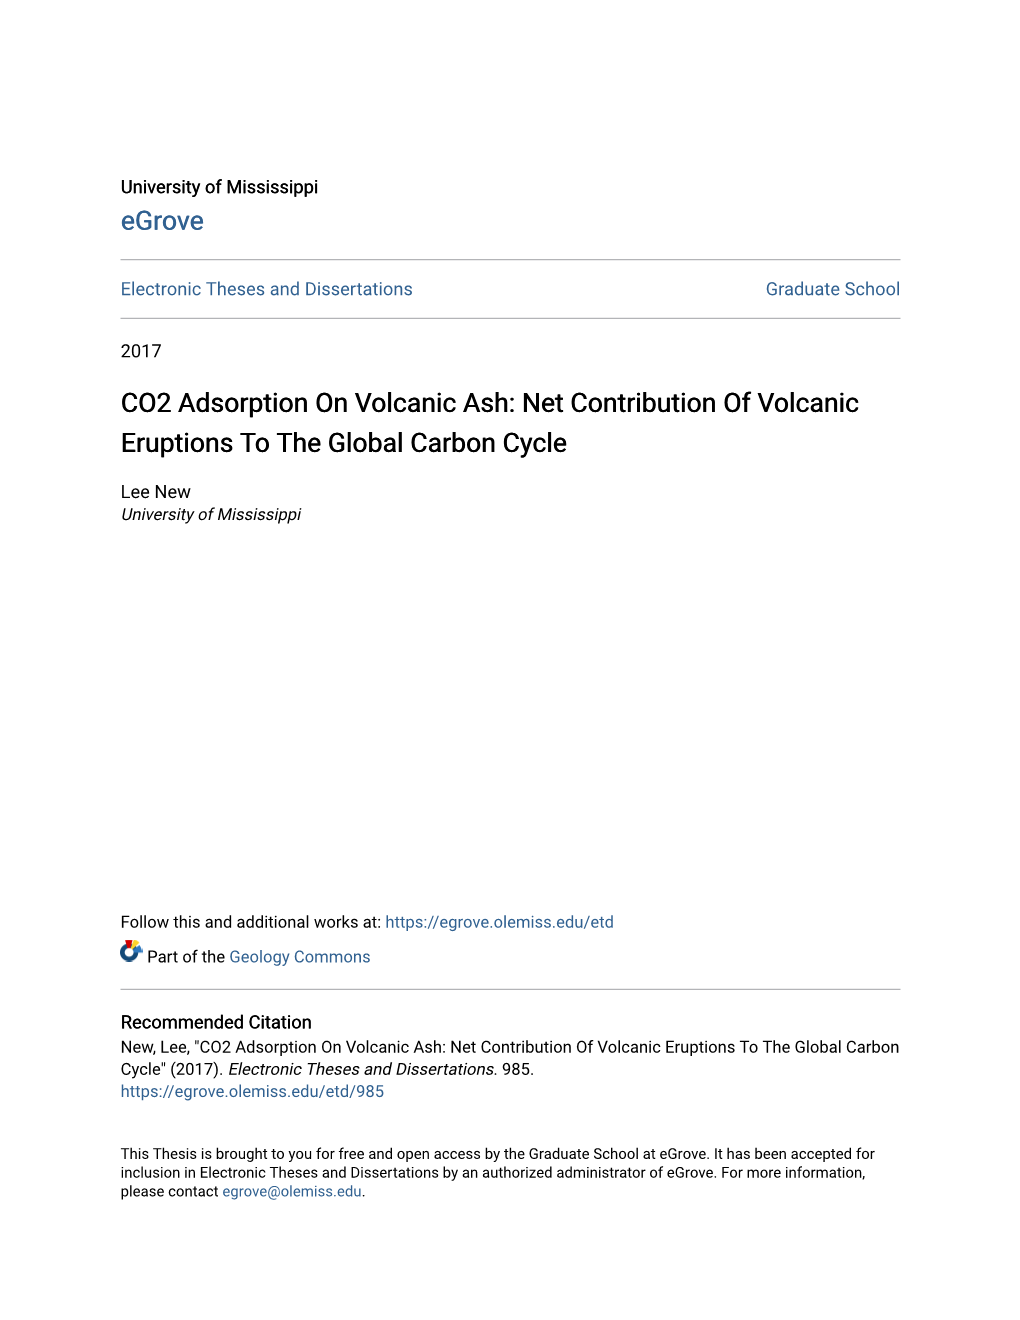 CO2 Adsorption on Volcanic Ash: Net Contribution of Volcanic Eruptions to the Global Carbon Cycle